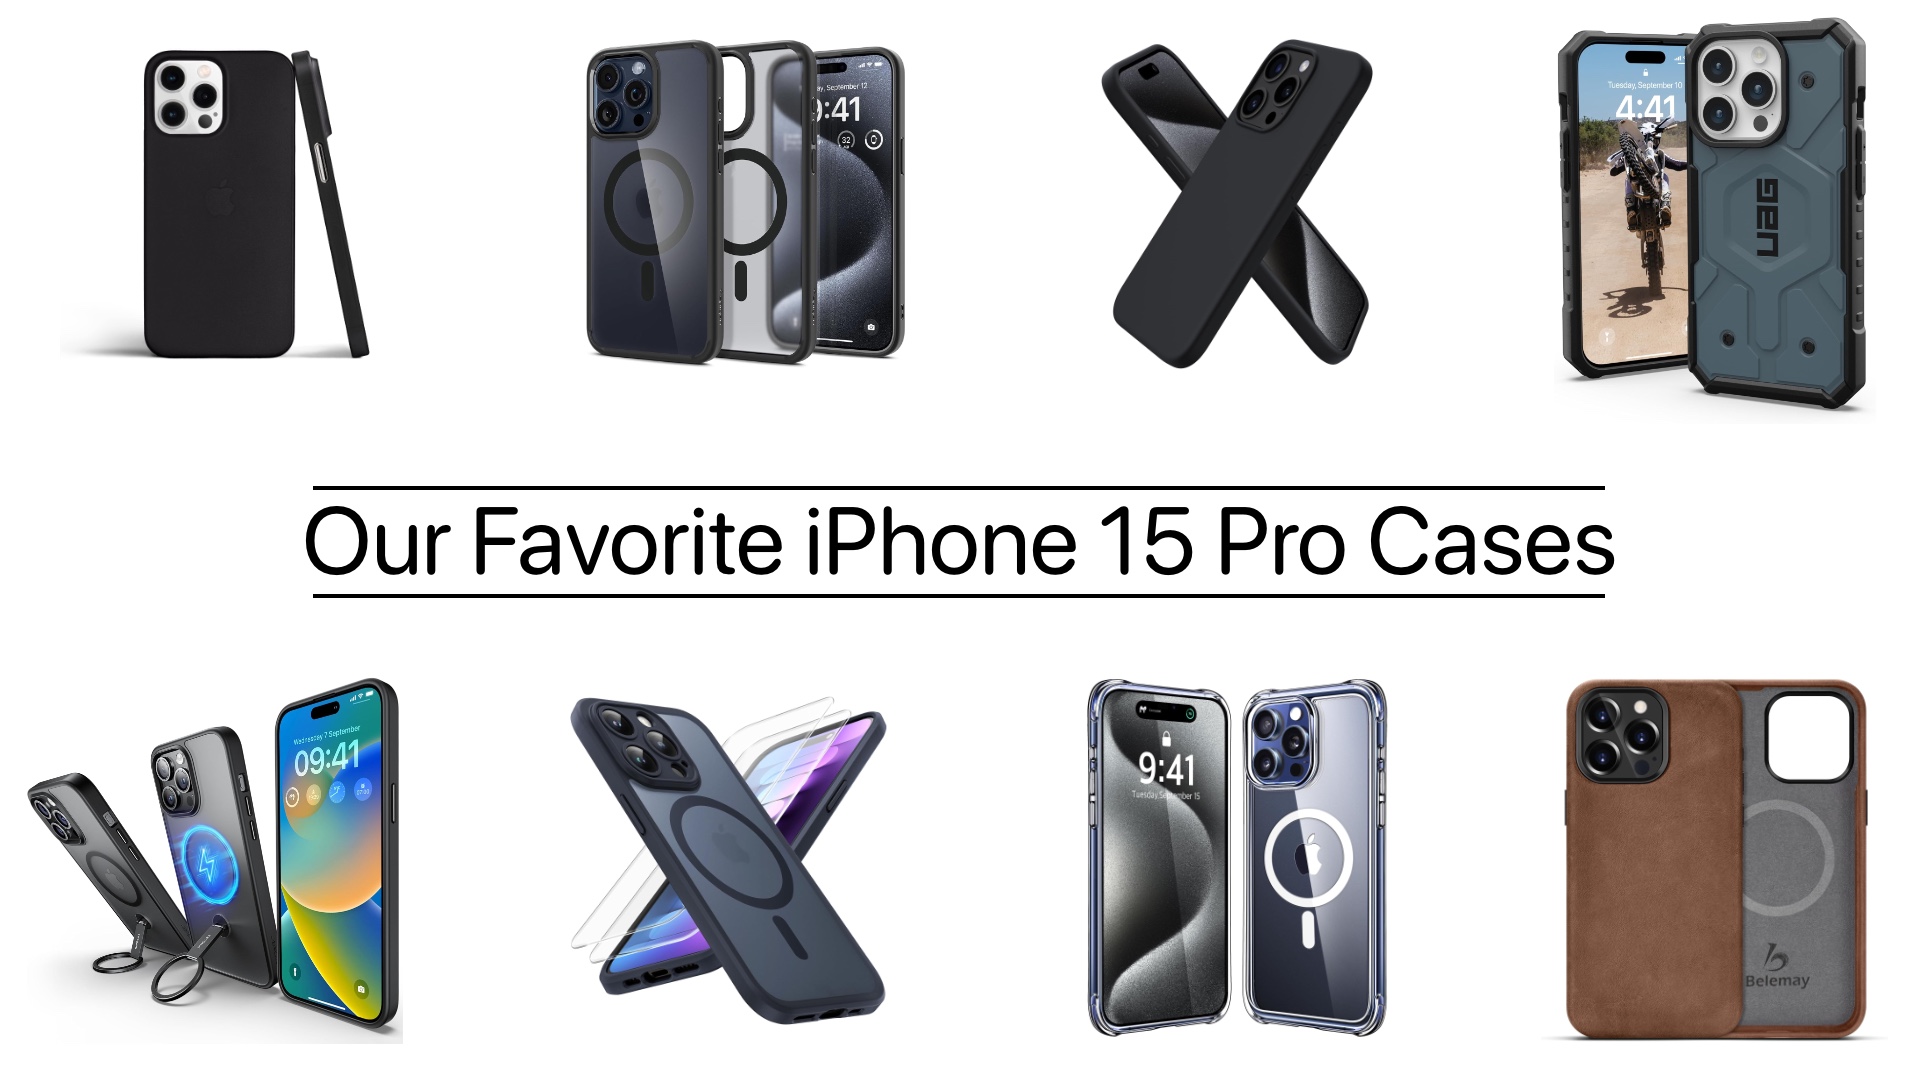 Hands-on with Spigen's iMac-inspired iPhone 15 case [Review]